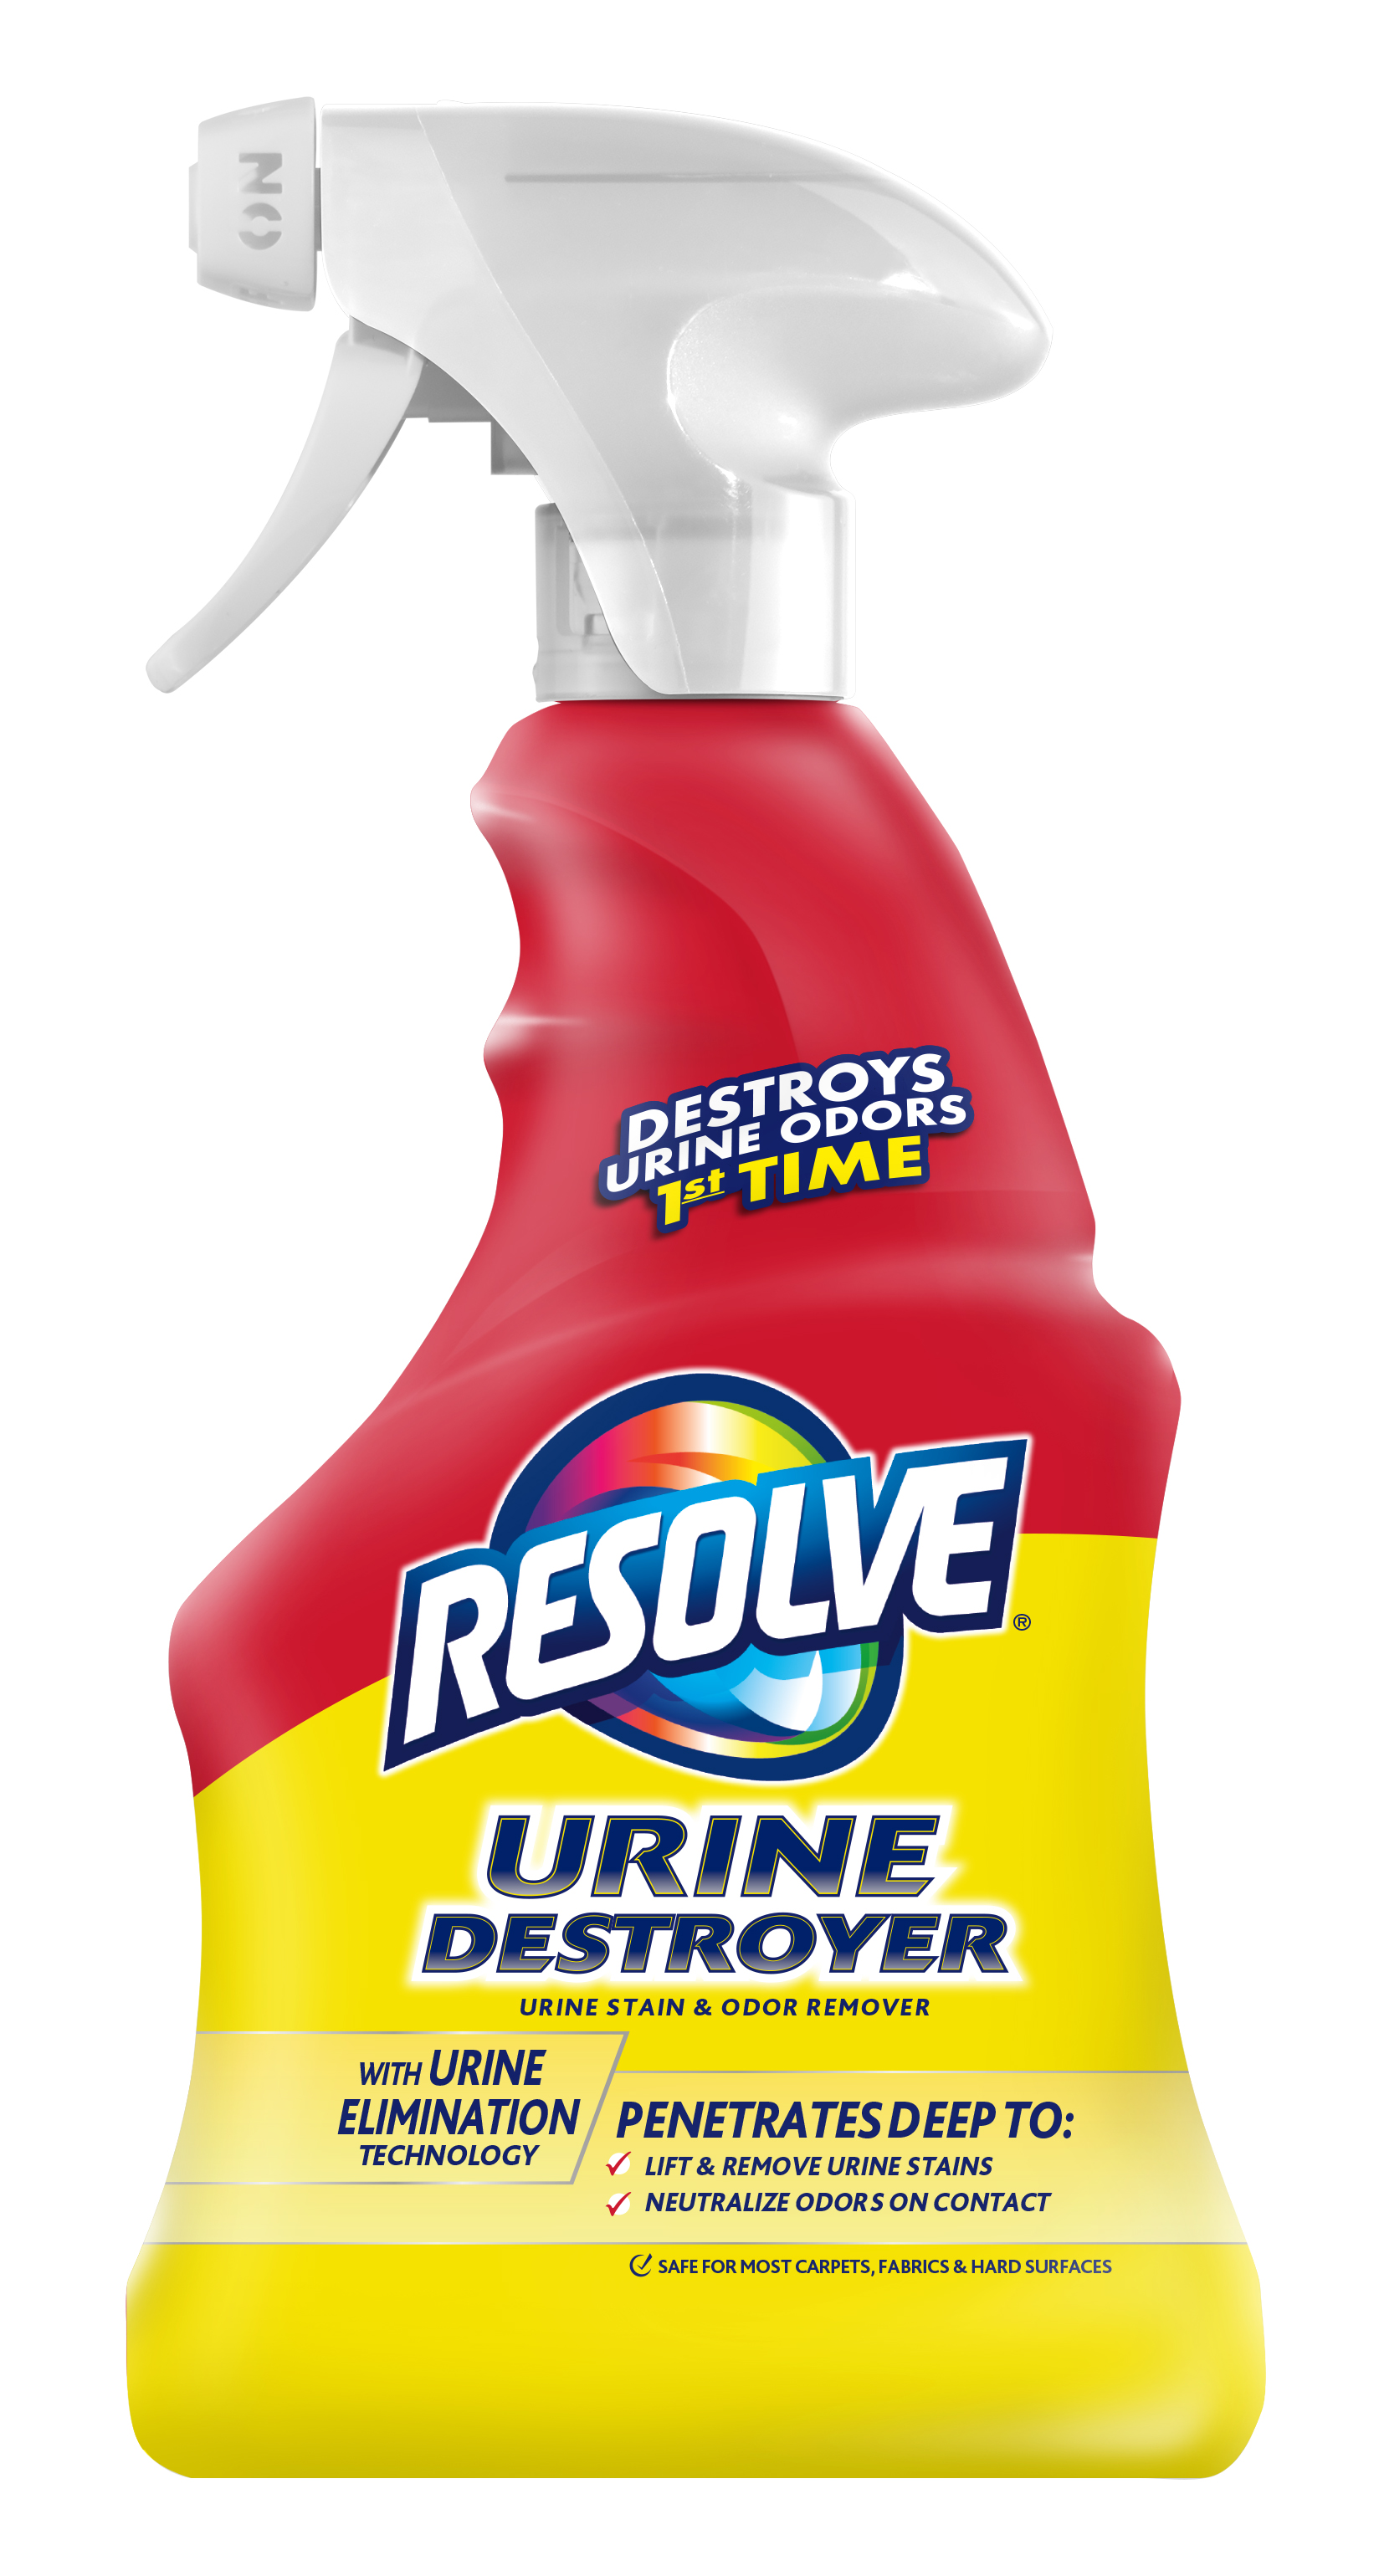 RESOLVE® Urine Destroyer Stain and Odor Remover